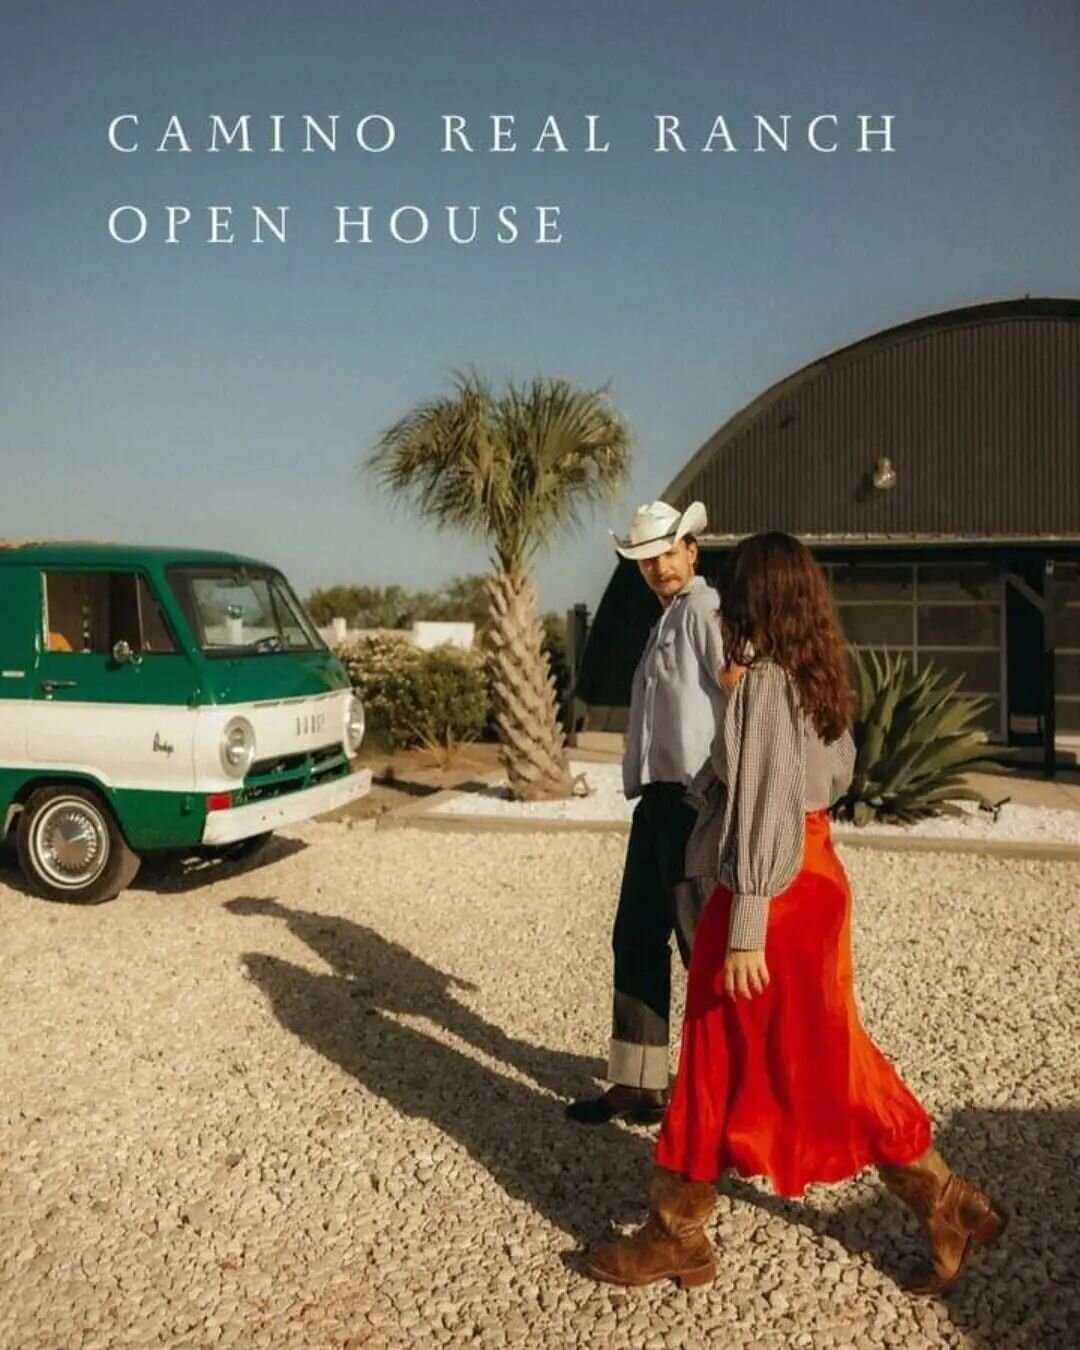 SAVE THE DATE Sunday, Jan. 21st! @caminorealranch will be having their annual open house event from 2 - 5 pm and we are honored to be there! The time was chosen specifically so those in attendance have the chance to see Camino's twinkles in action! A